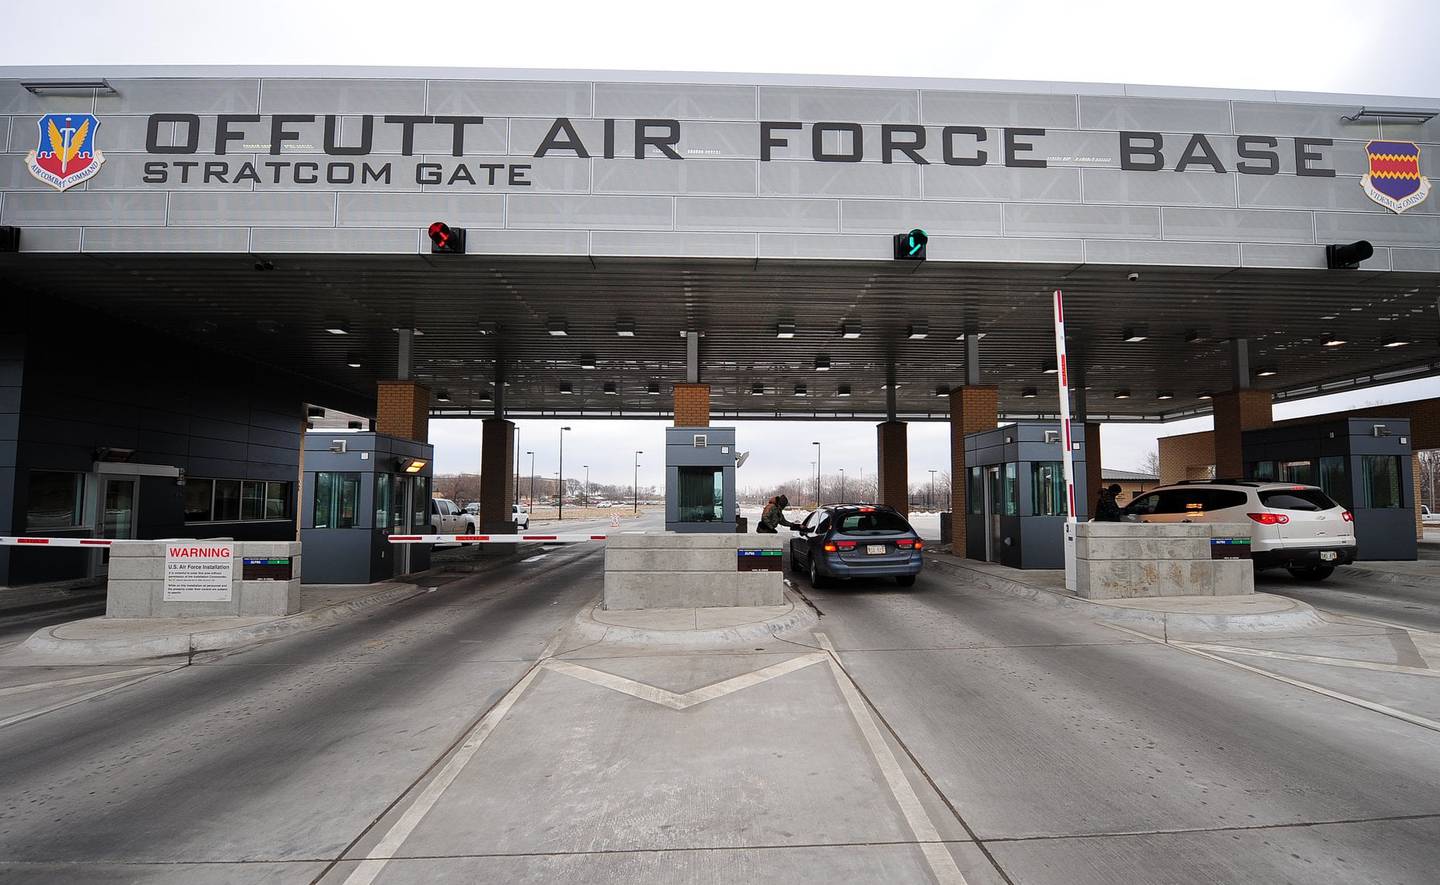 Shown is the StratCom Gate at Offutt Air Force Base in Nebraska. These are the kinds of entrances researchers will study hardening against electric vehicles.